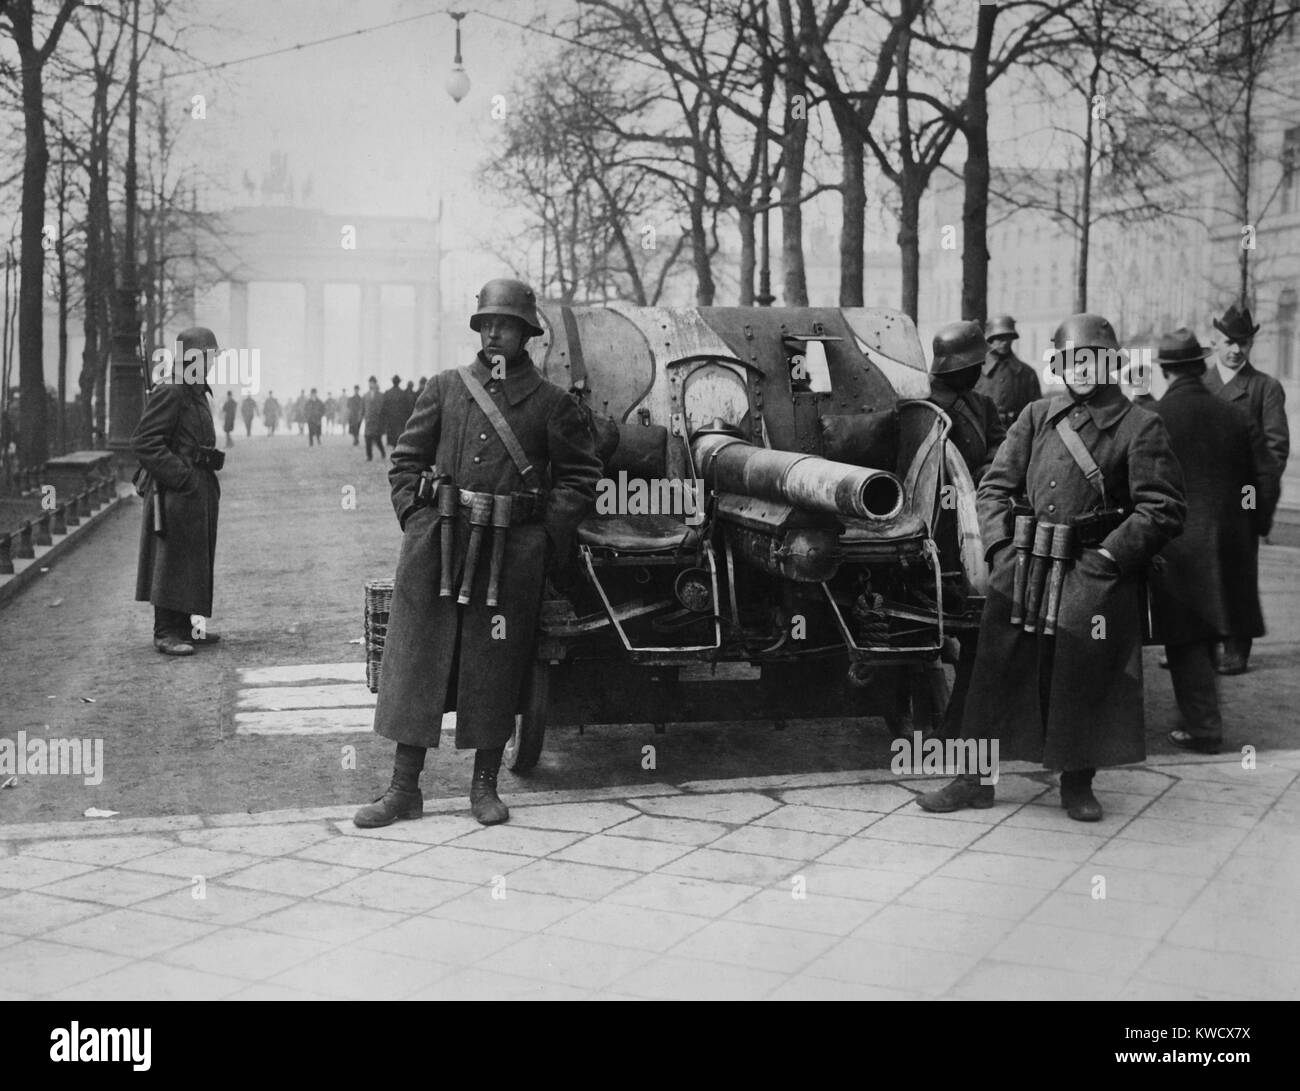 Forces of the Kapp Putsch of March 1920 against the German Weimer Republic government in Berlin. They were followers of Wolfgang Kapp, a prominent nationalist politician who sought and failed to install a autocratic right wing government (BSLOC 2017 2 66) Stock Photo